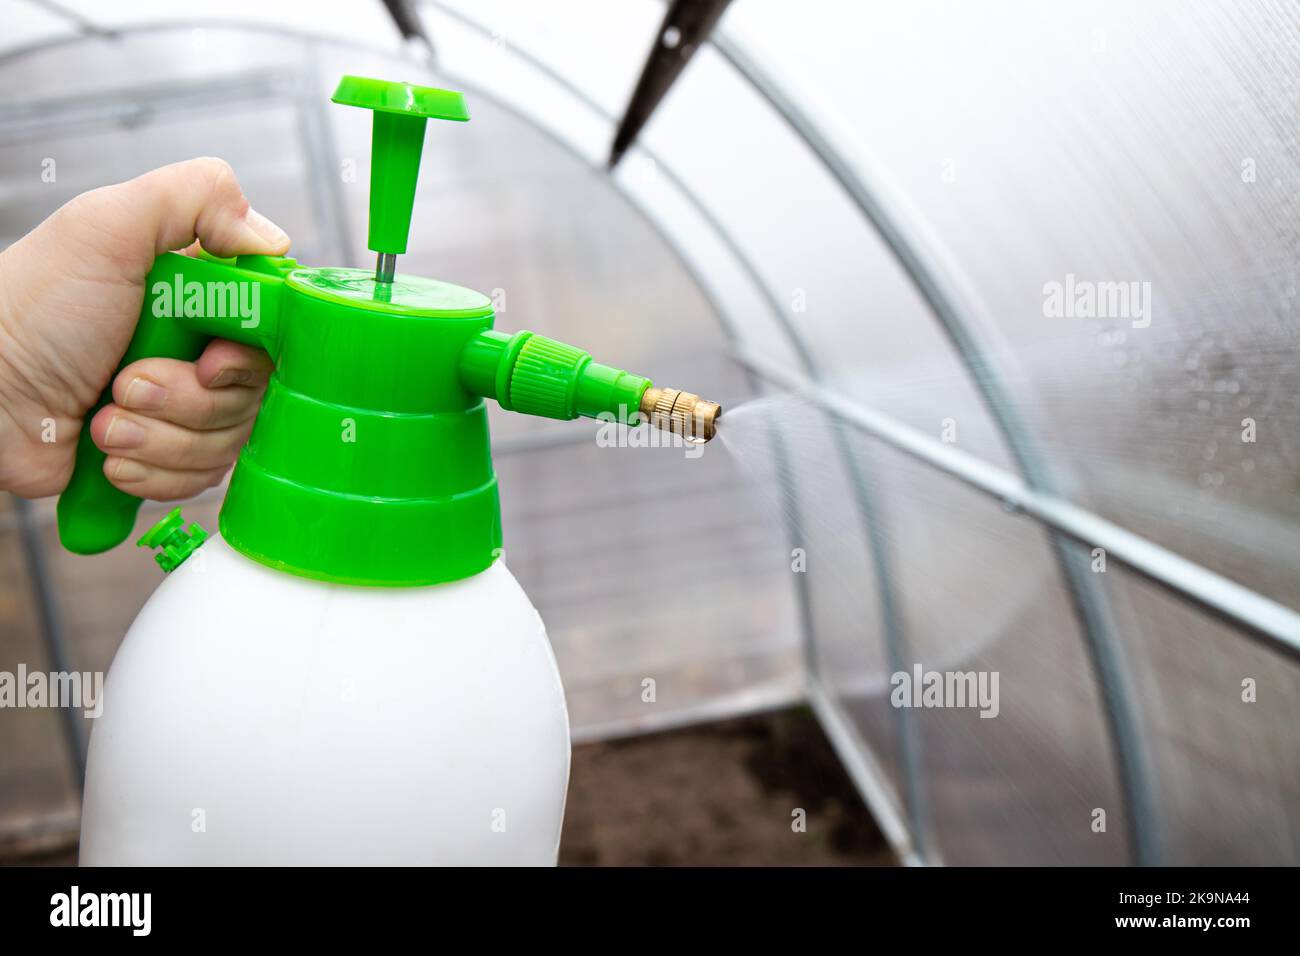 Cleaning the empty greenhouse with an antibacterial cleaner liquid, gardener hand spray it on the greenhouse wall for disinfection. Autumn gardening. Stock Photo